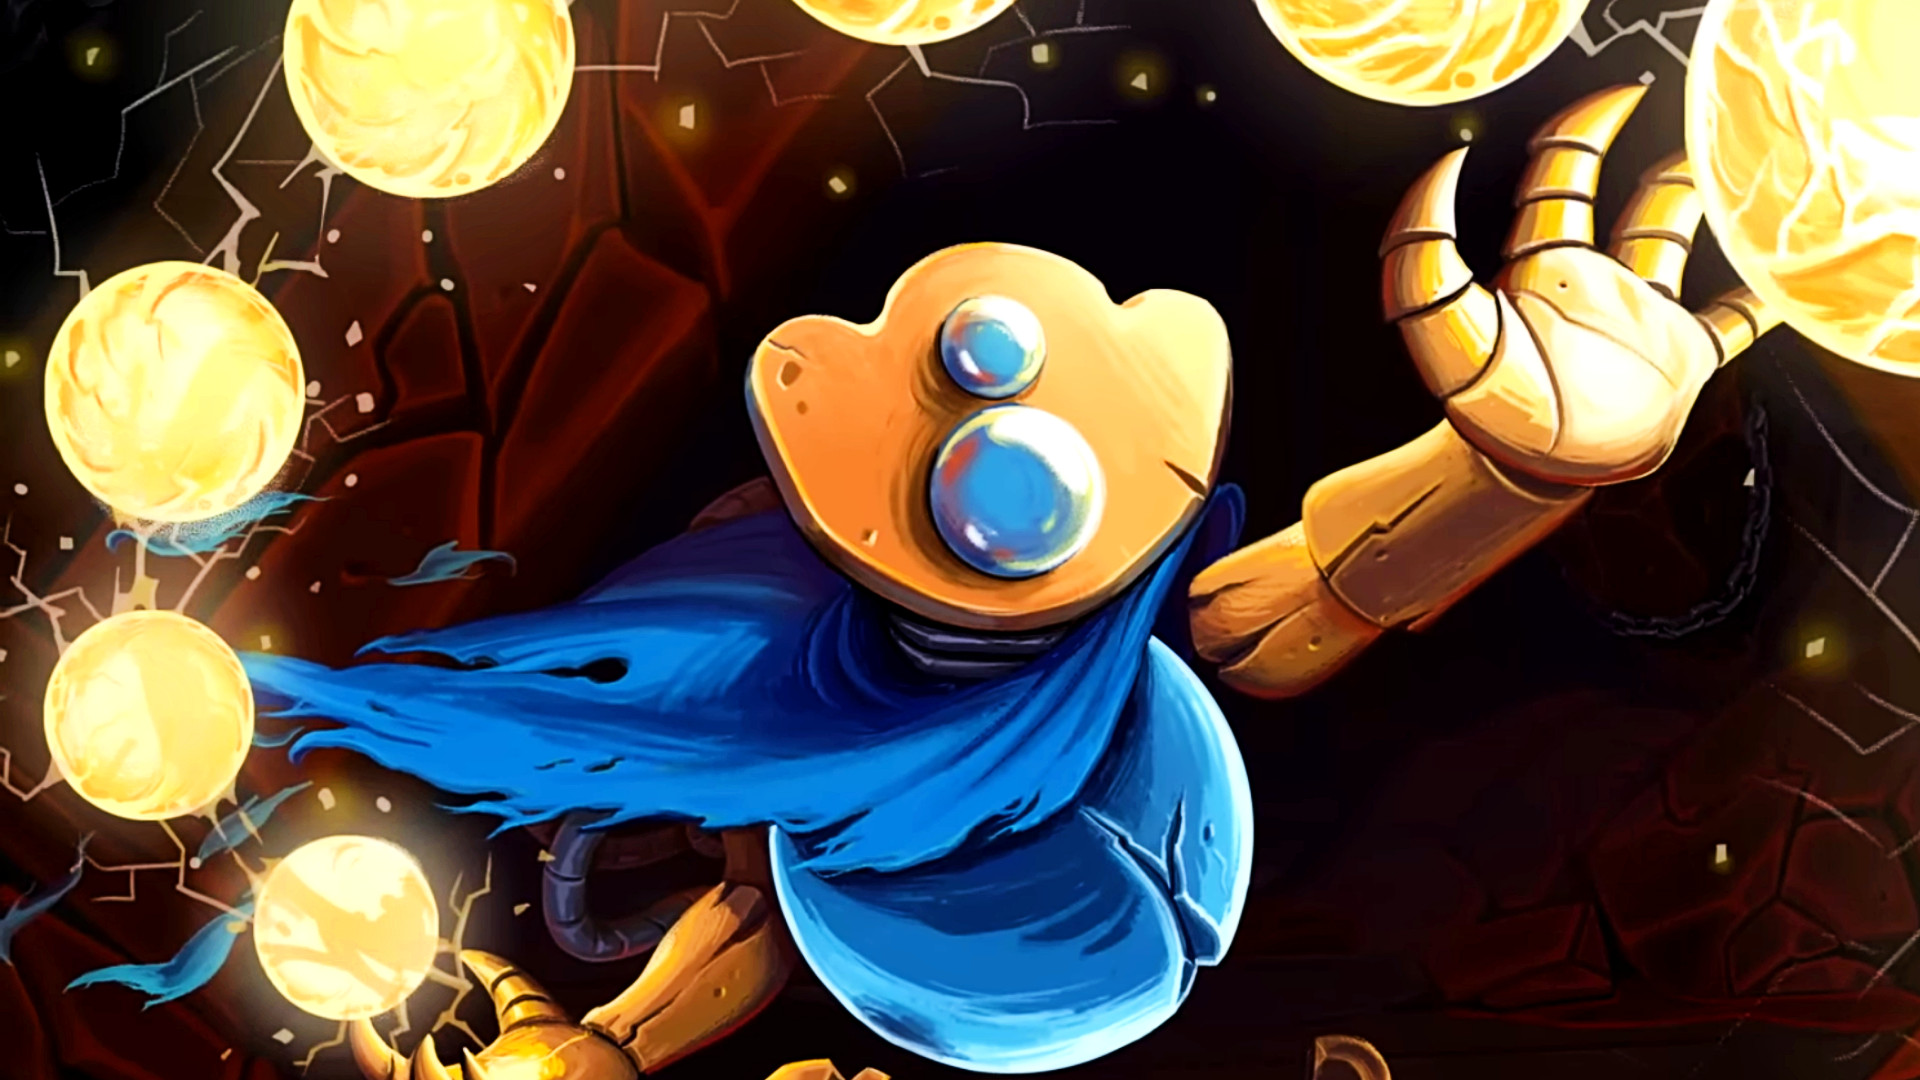 Slay the Spire is yours for cheap right now, so everyone should try it